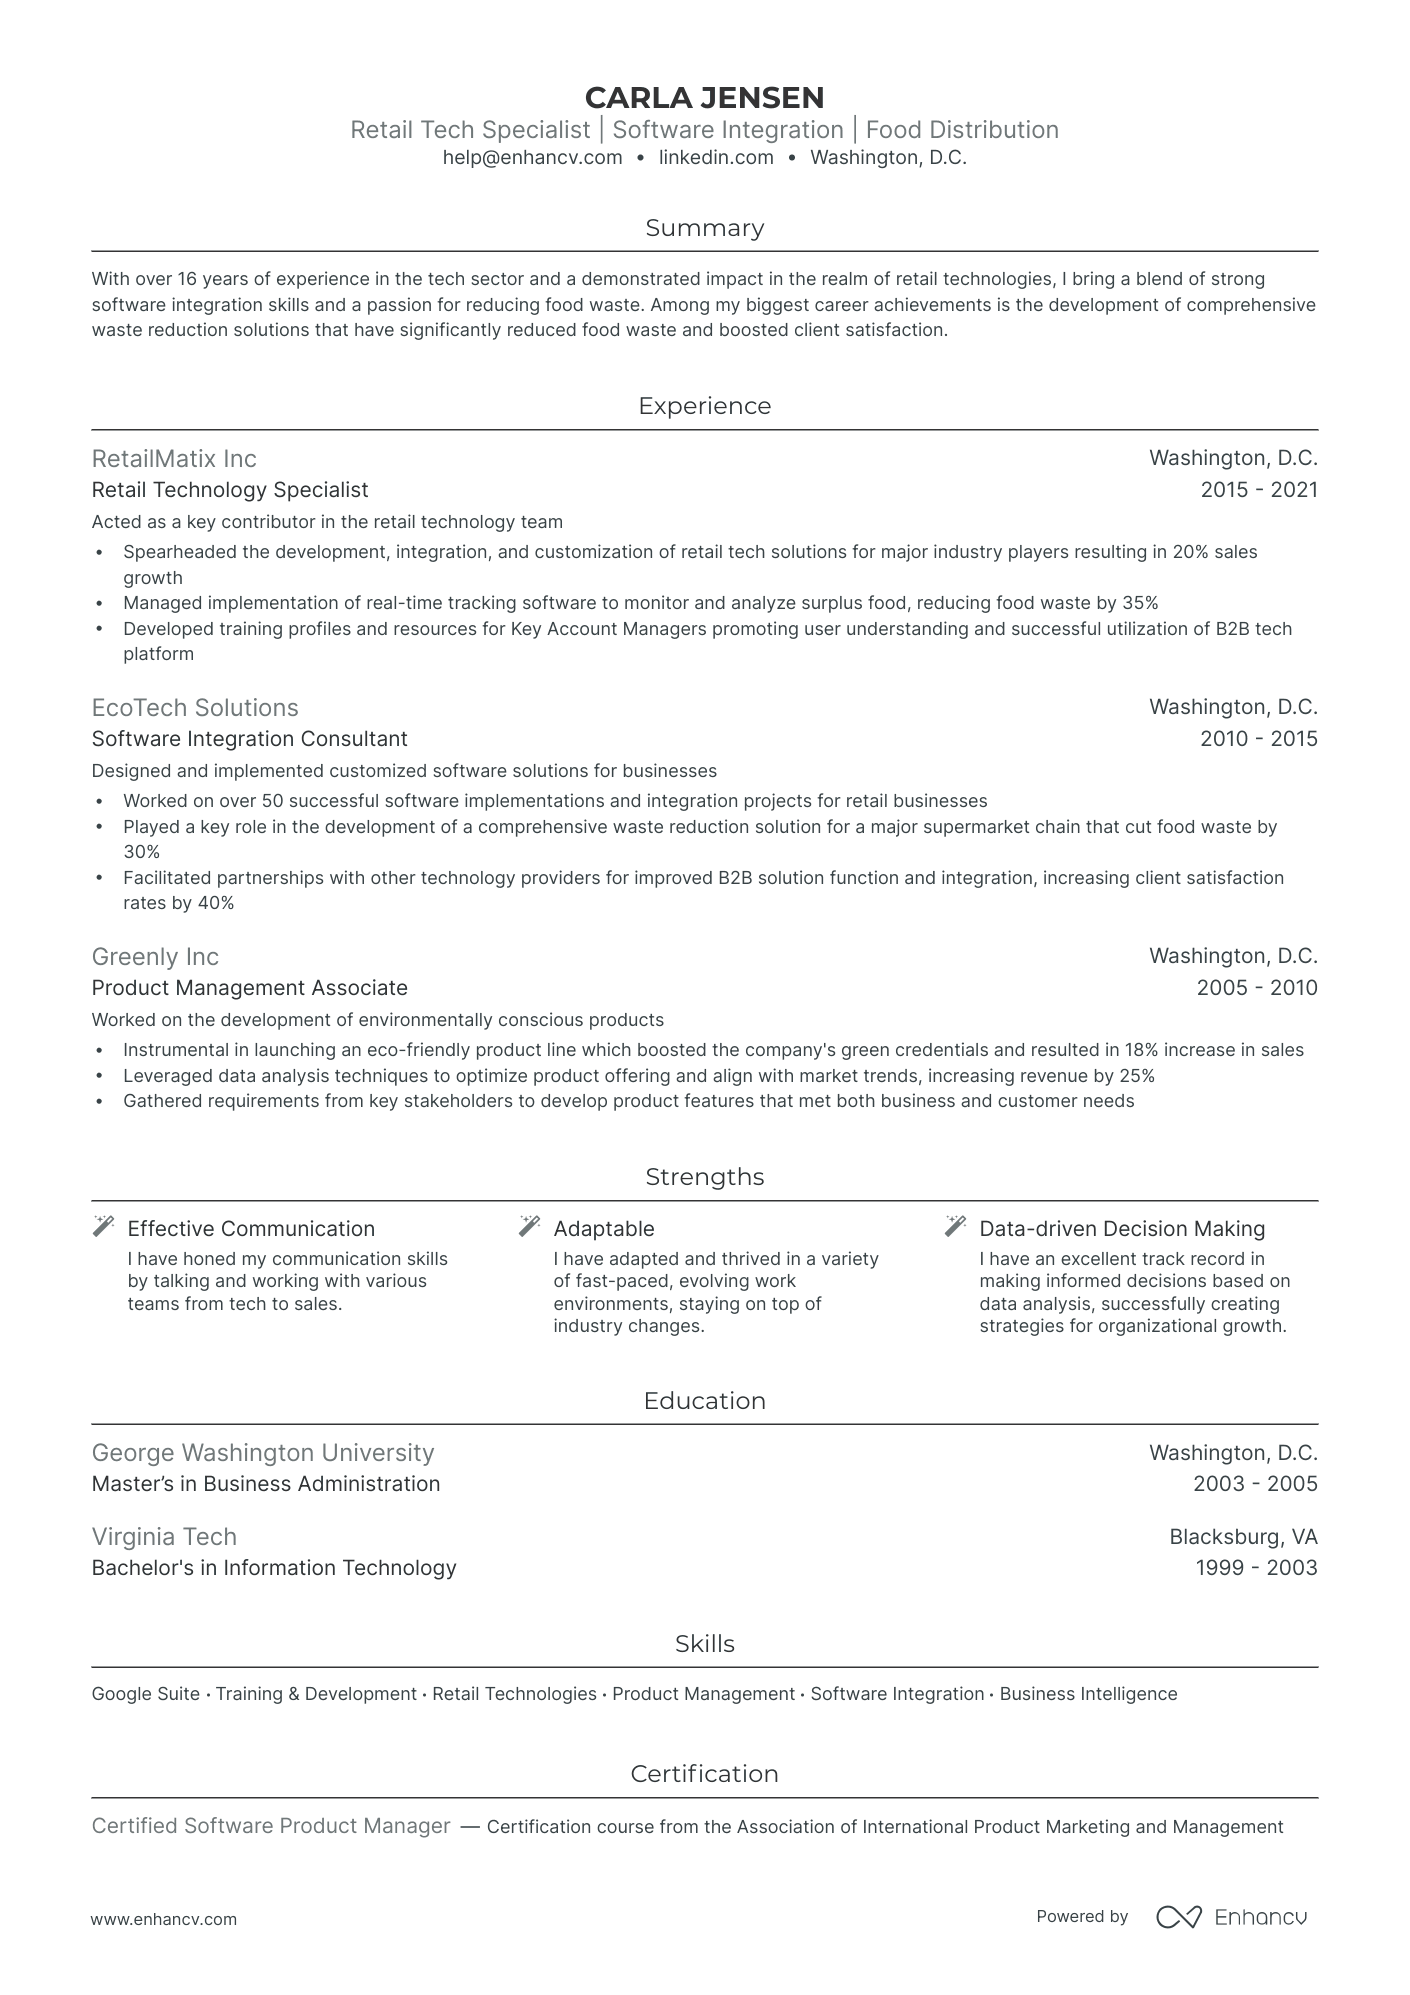 production support specialist resume